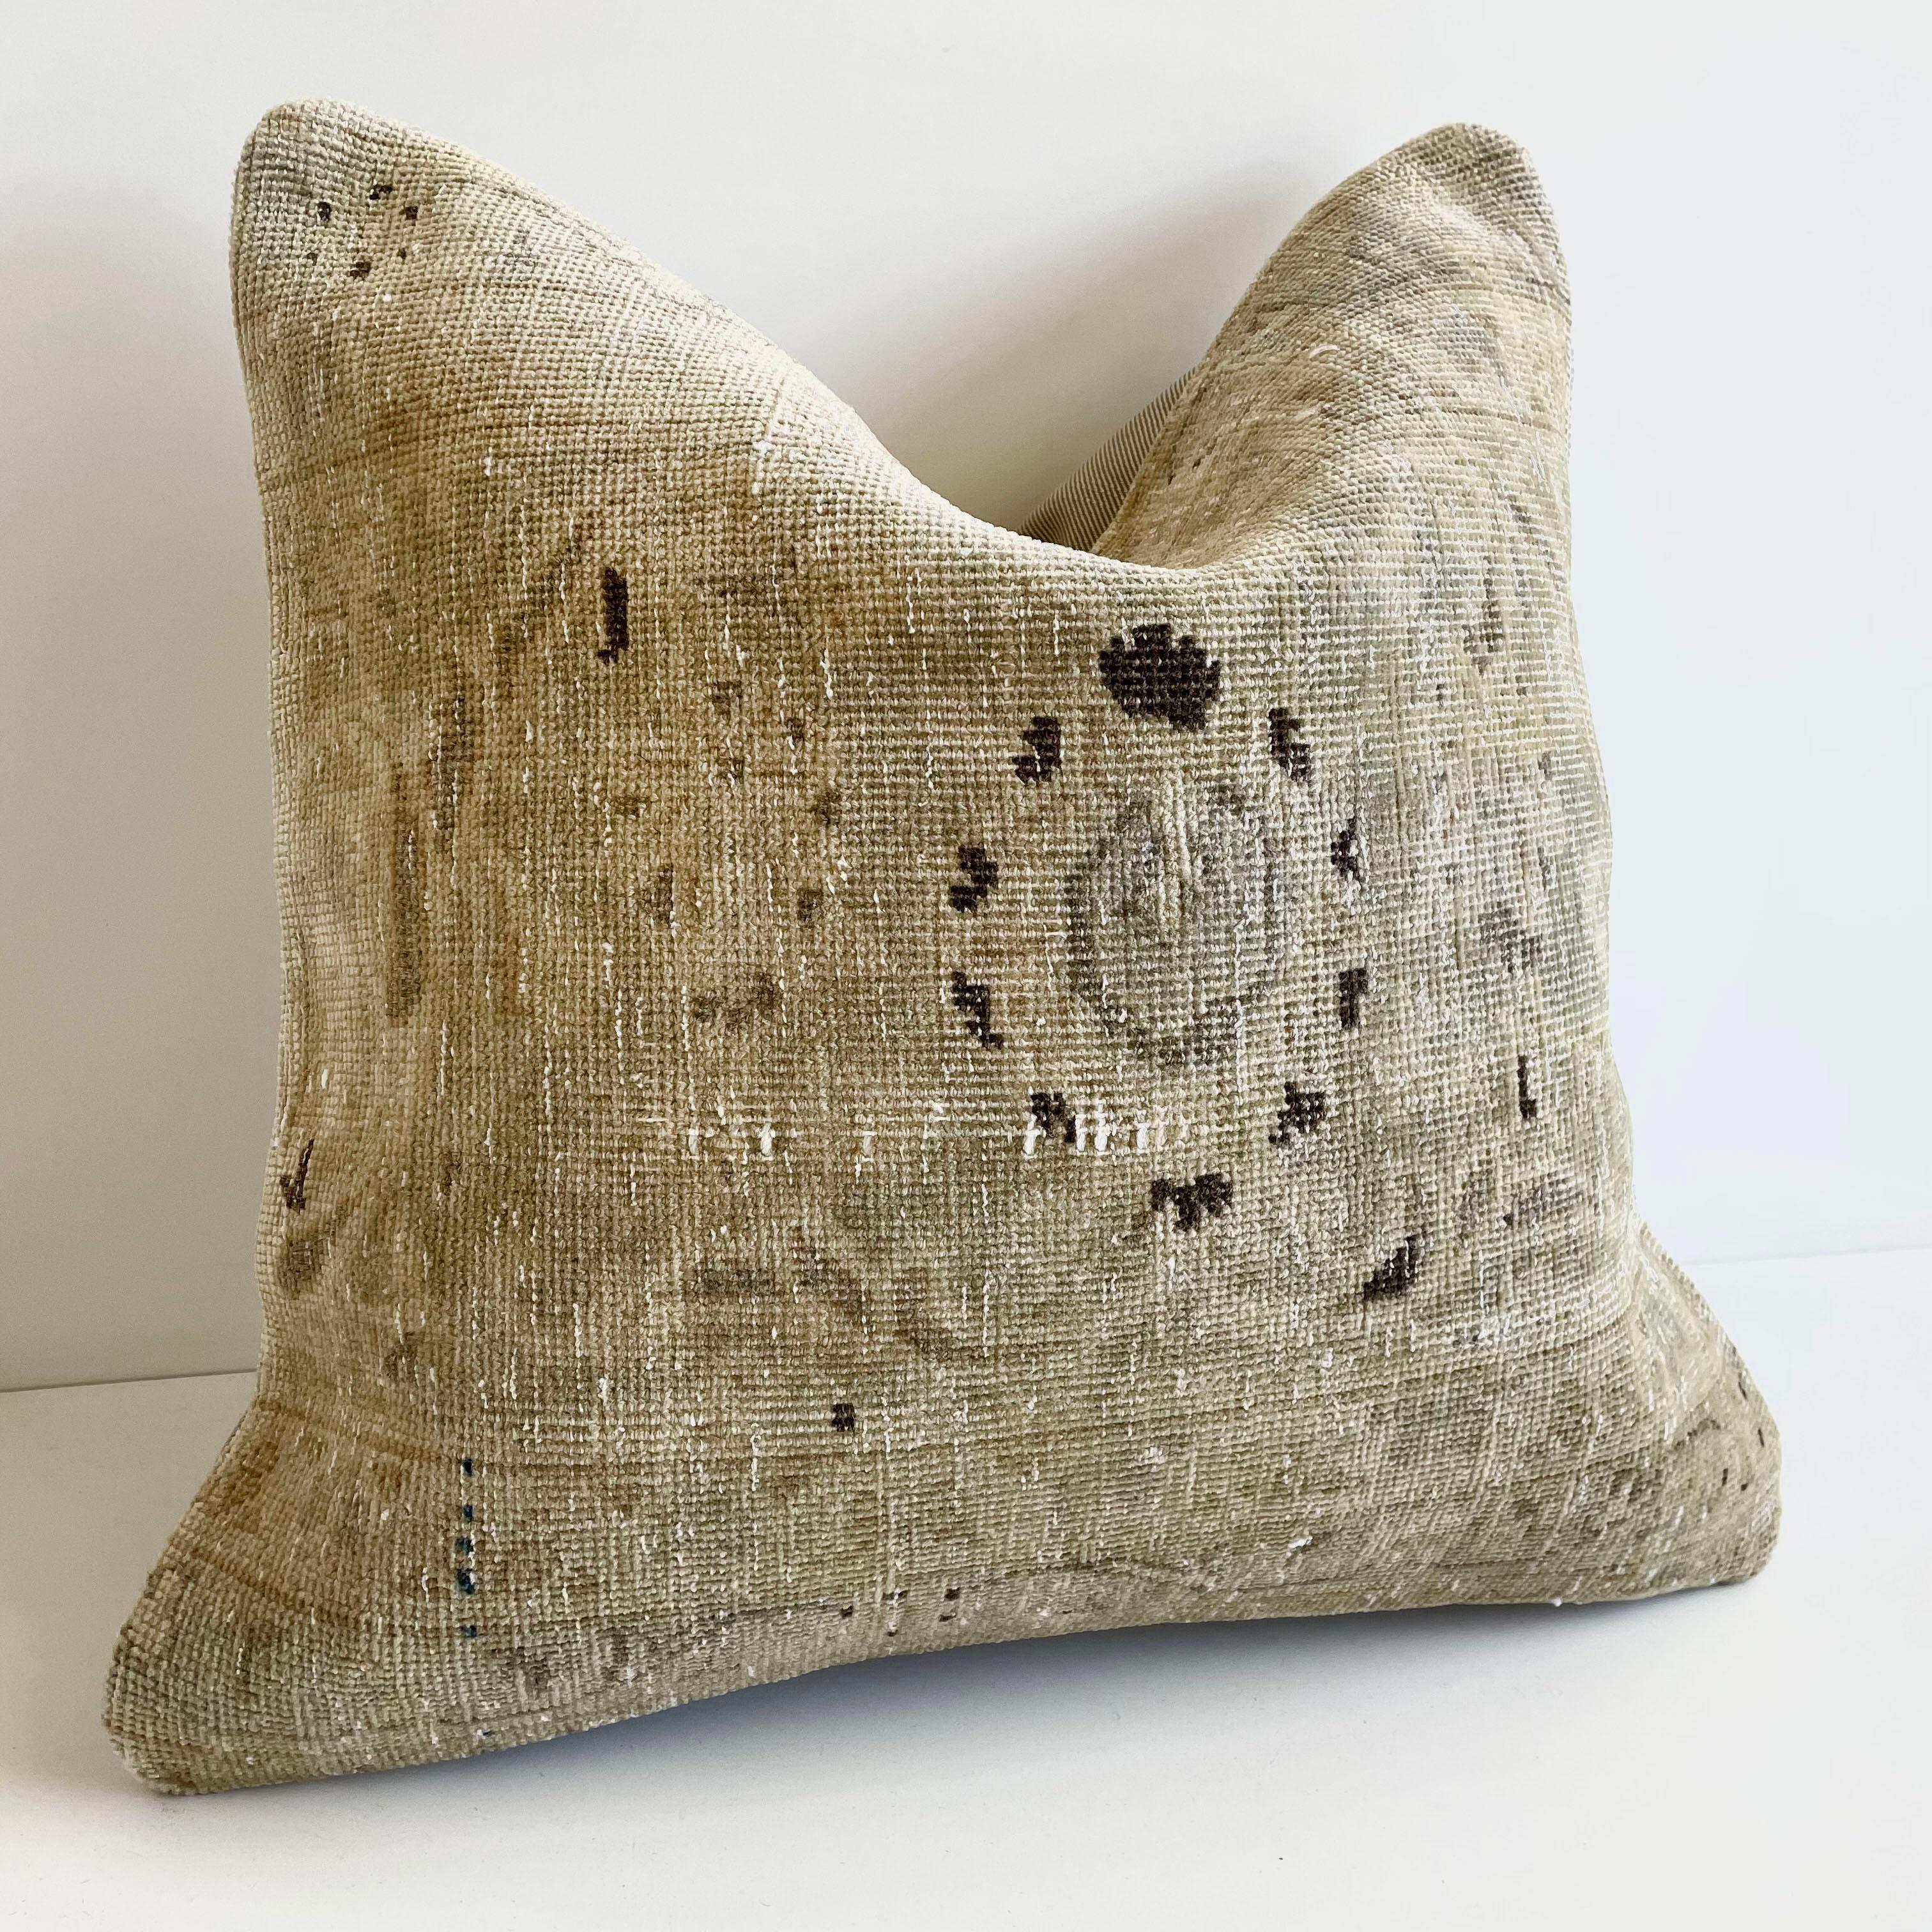 Antique woven rug pillow in natural gray brown and taupe with geometric patterns. The backside is a coordinating cotton. Our pillows are constructed with vintage one of a kind textiles from around the globe. Carefully constructed with the finest